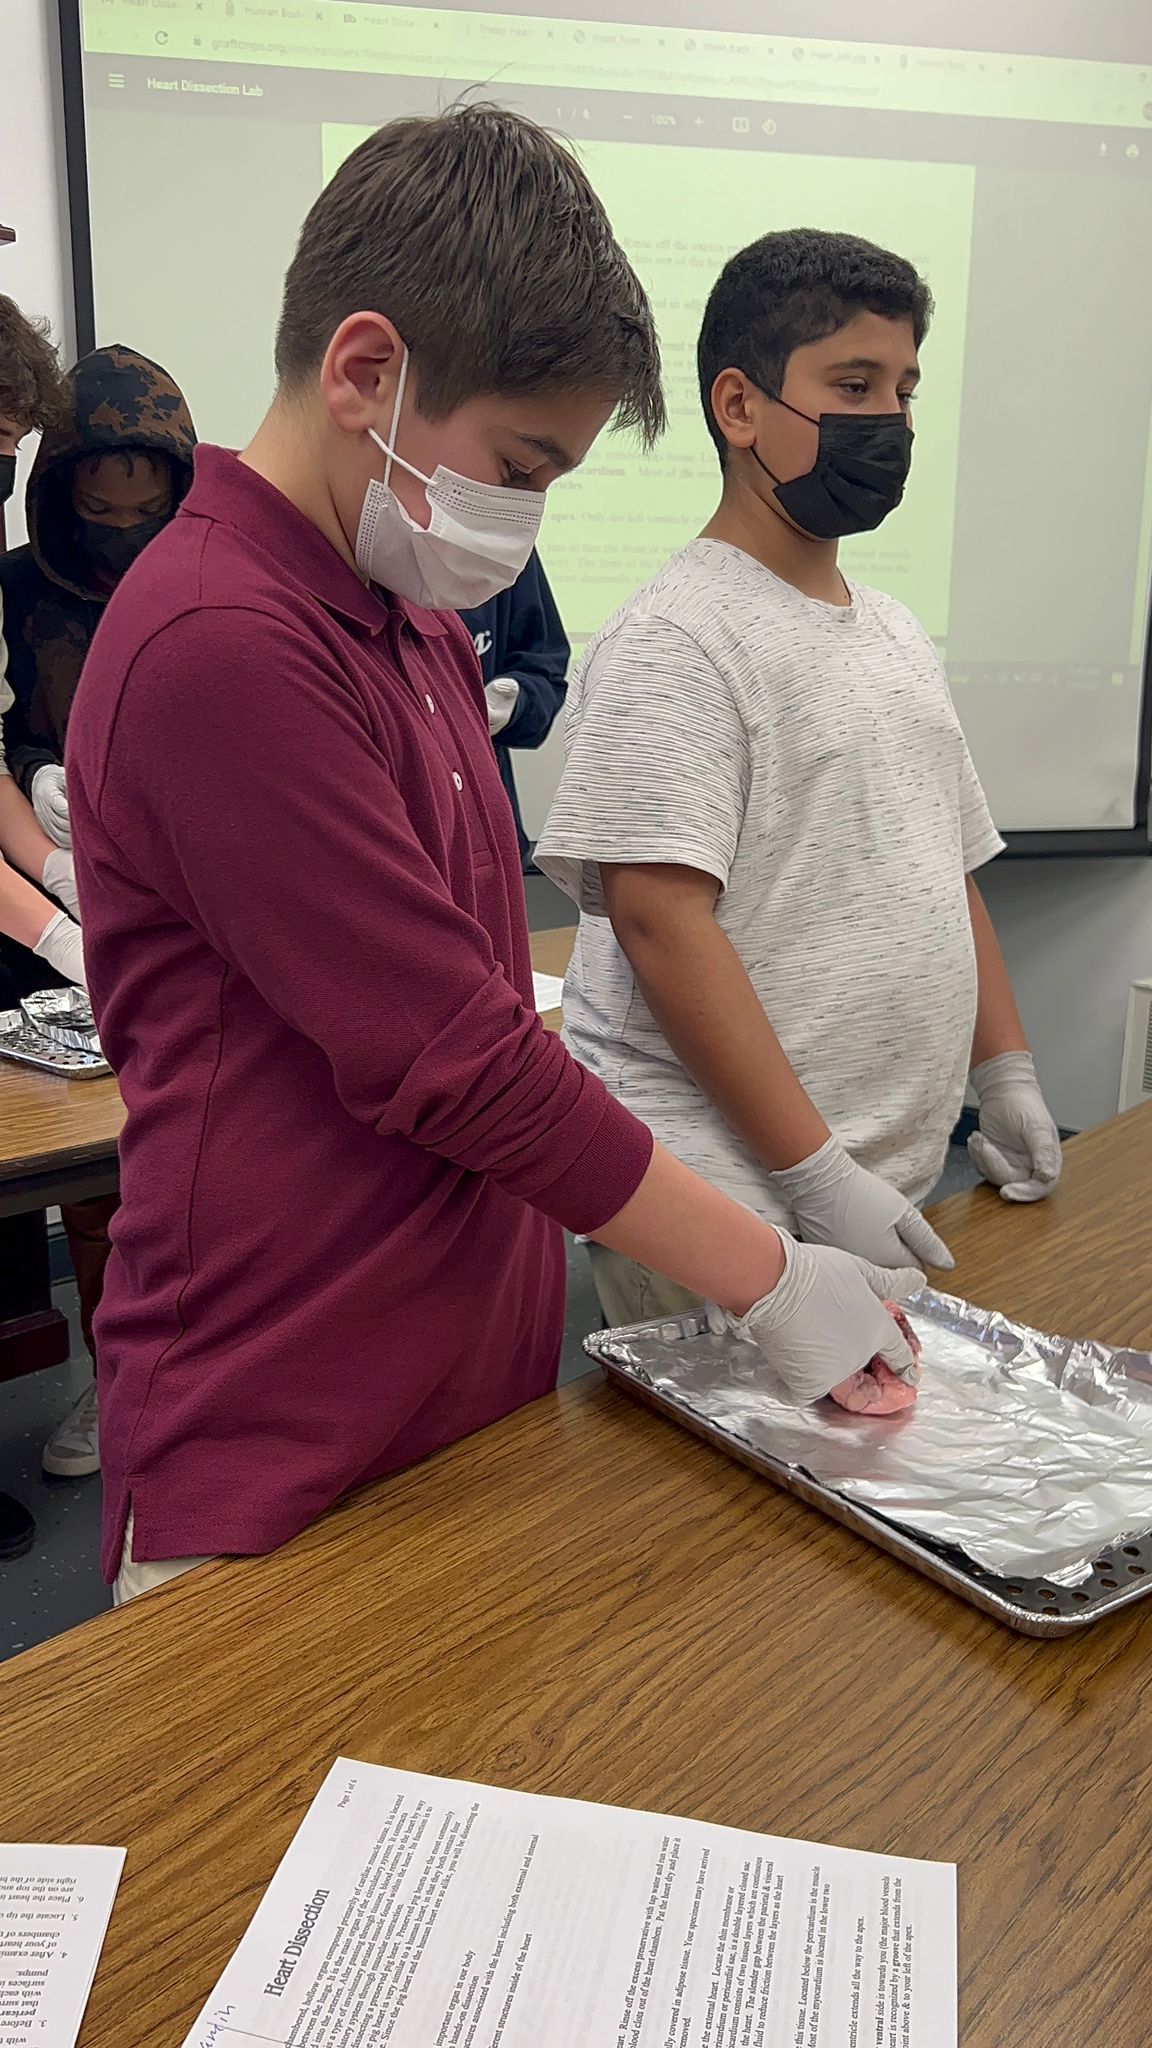 Heart Dissection Lab